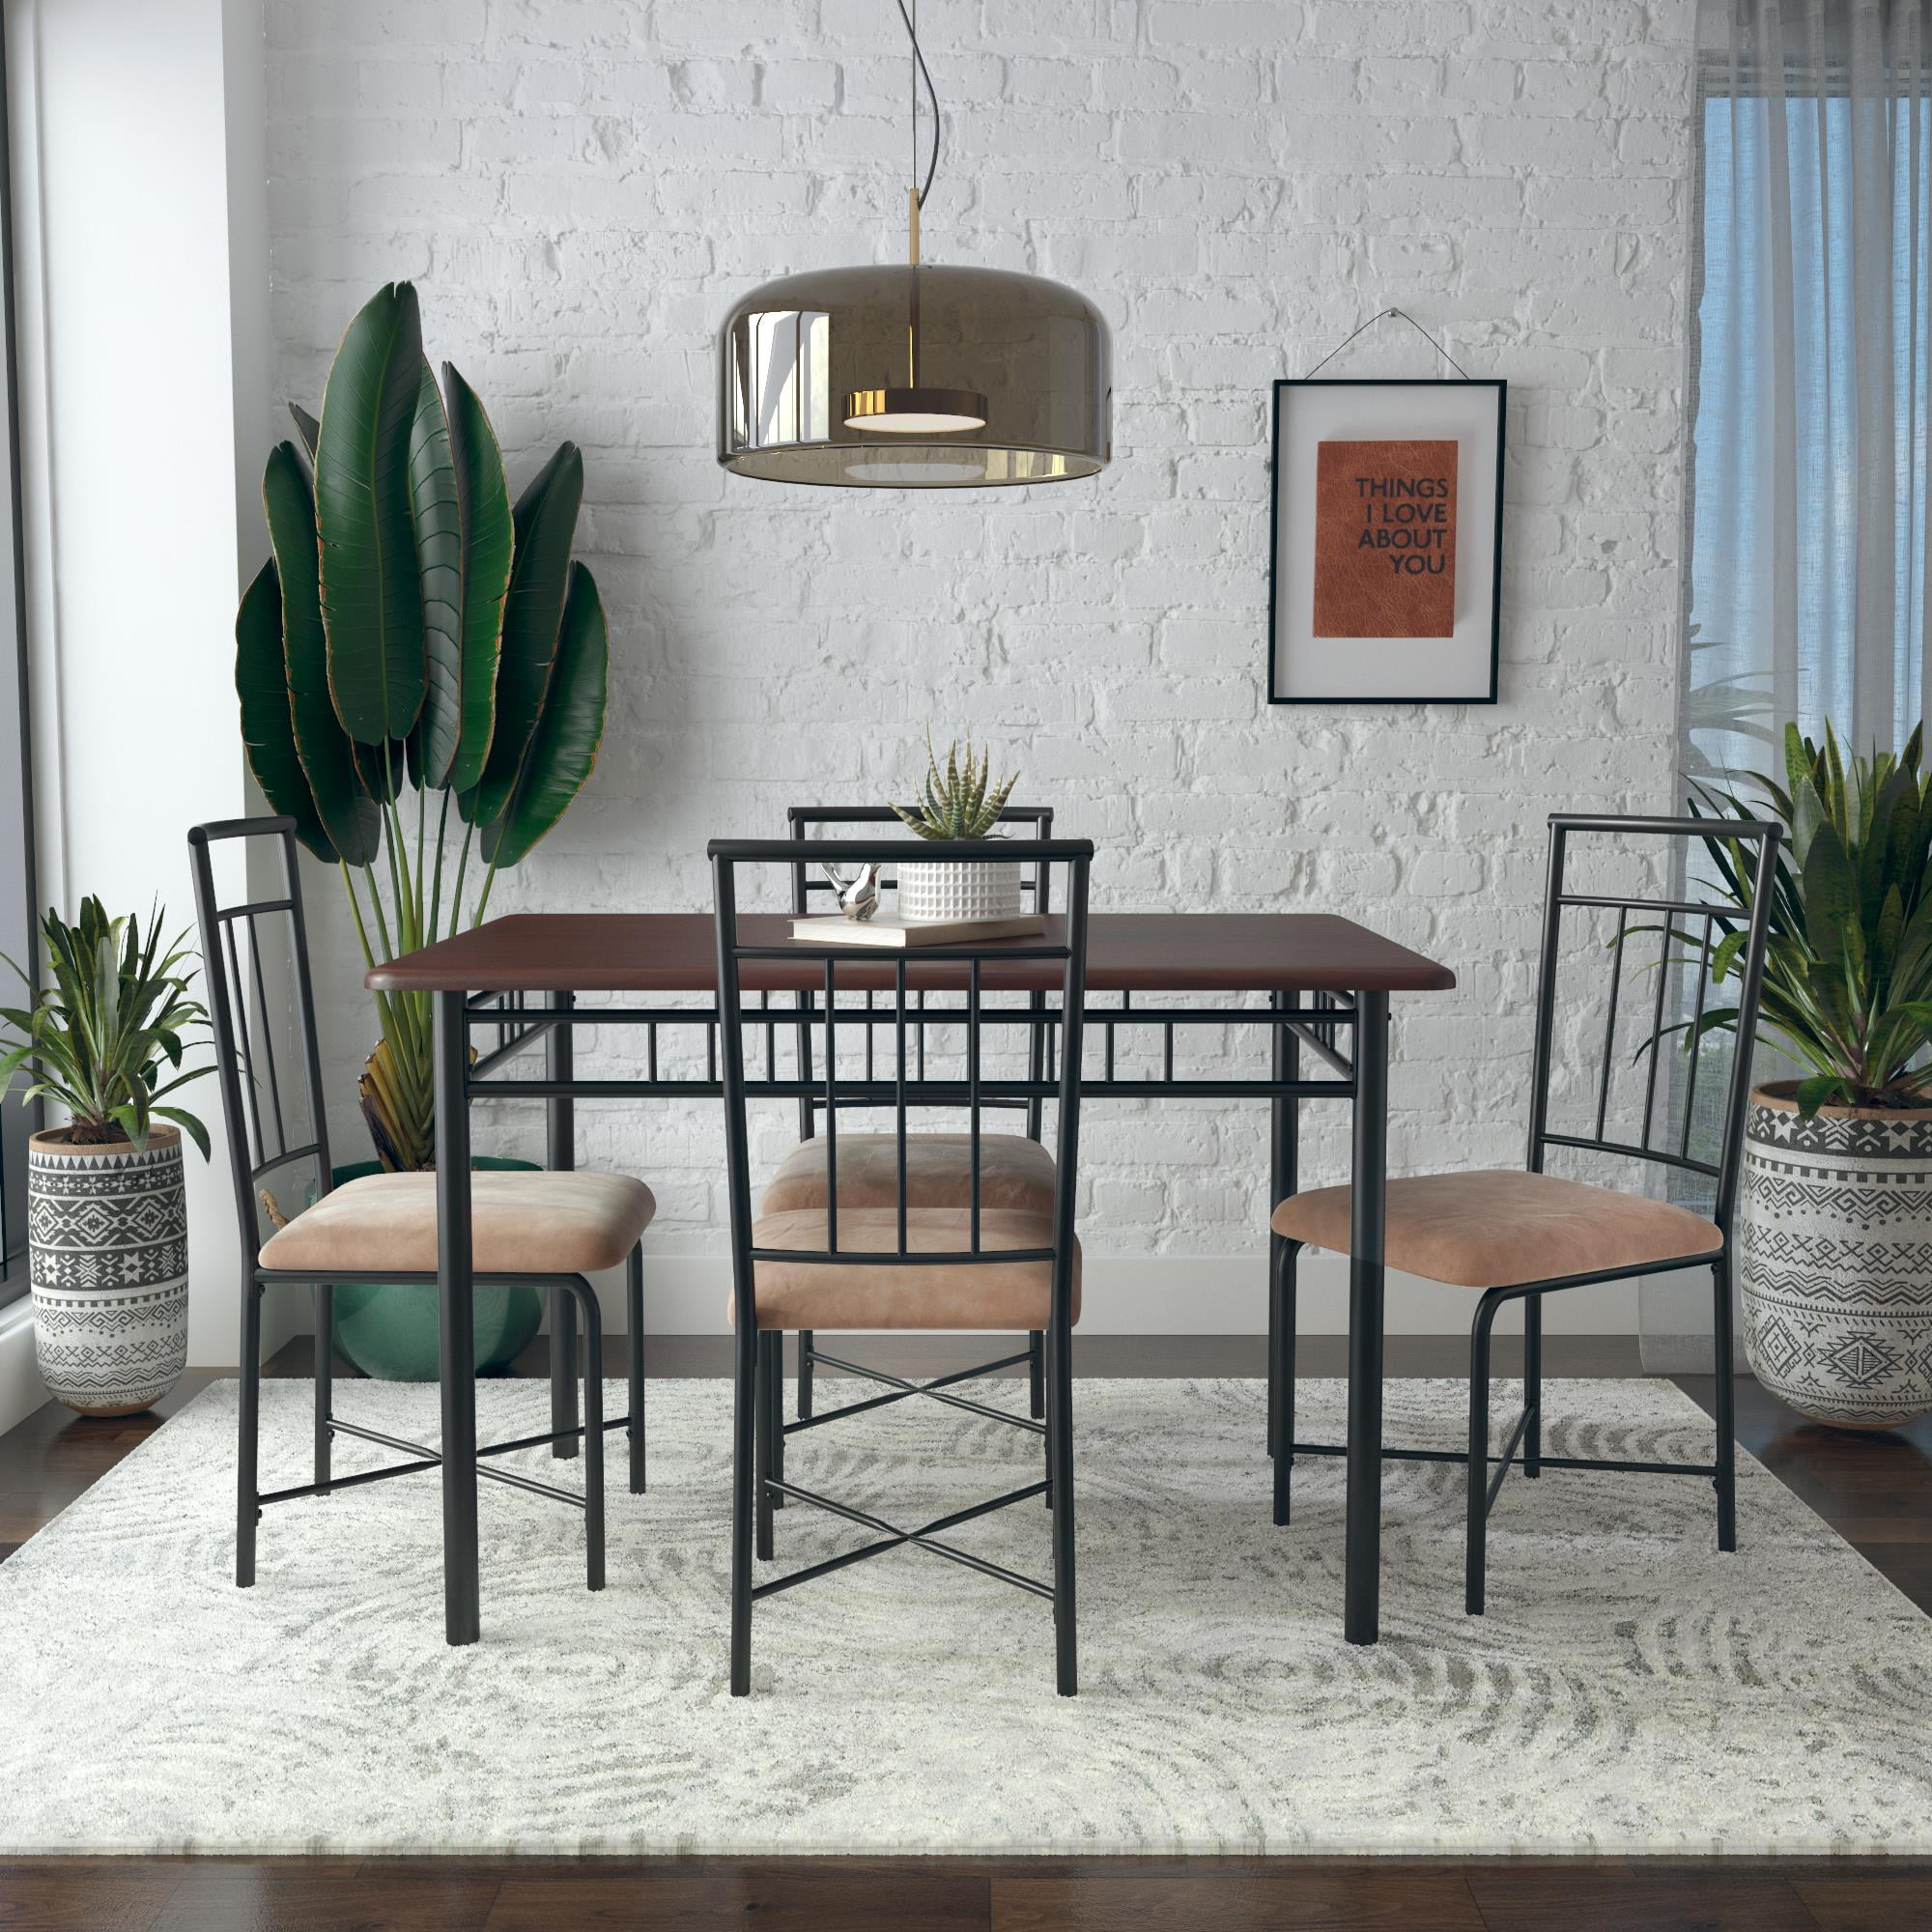 5-Piece Mainstays Louise Traditional Wood & Metal Dining Set (Deep Walnut Brown) $115 + Free Shipping